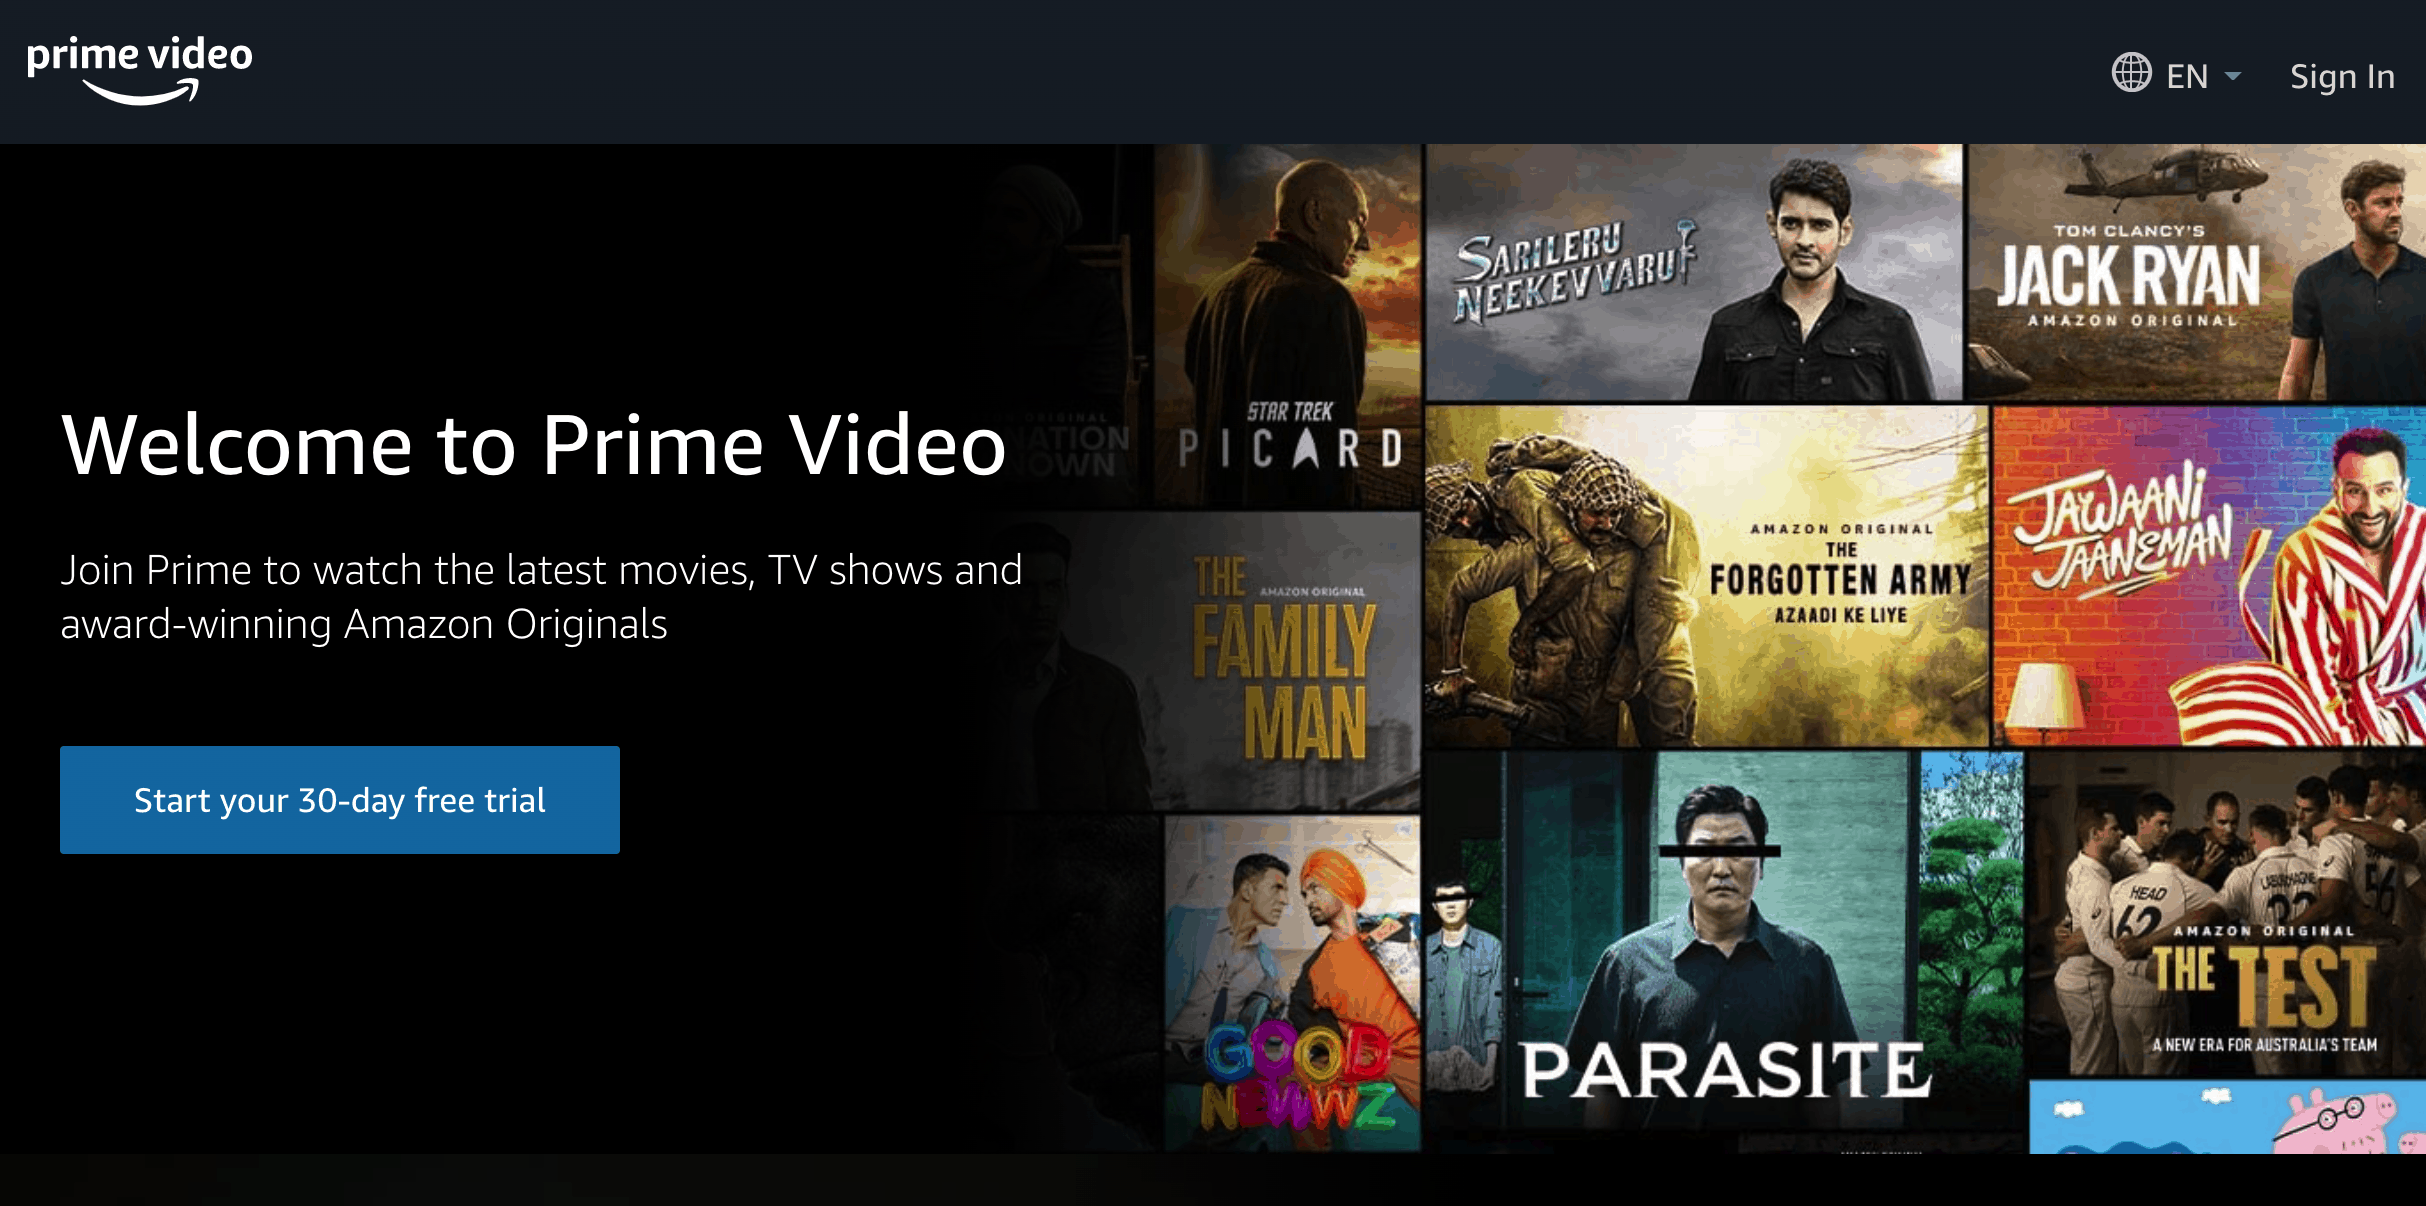 prime video not working on ps4